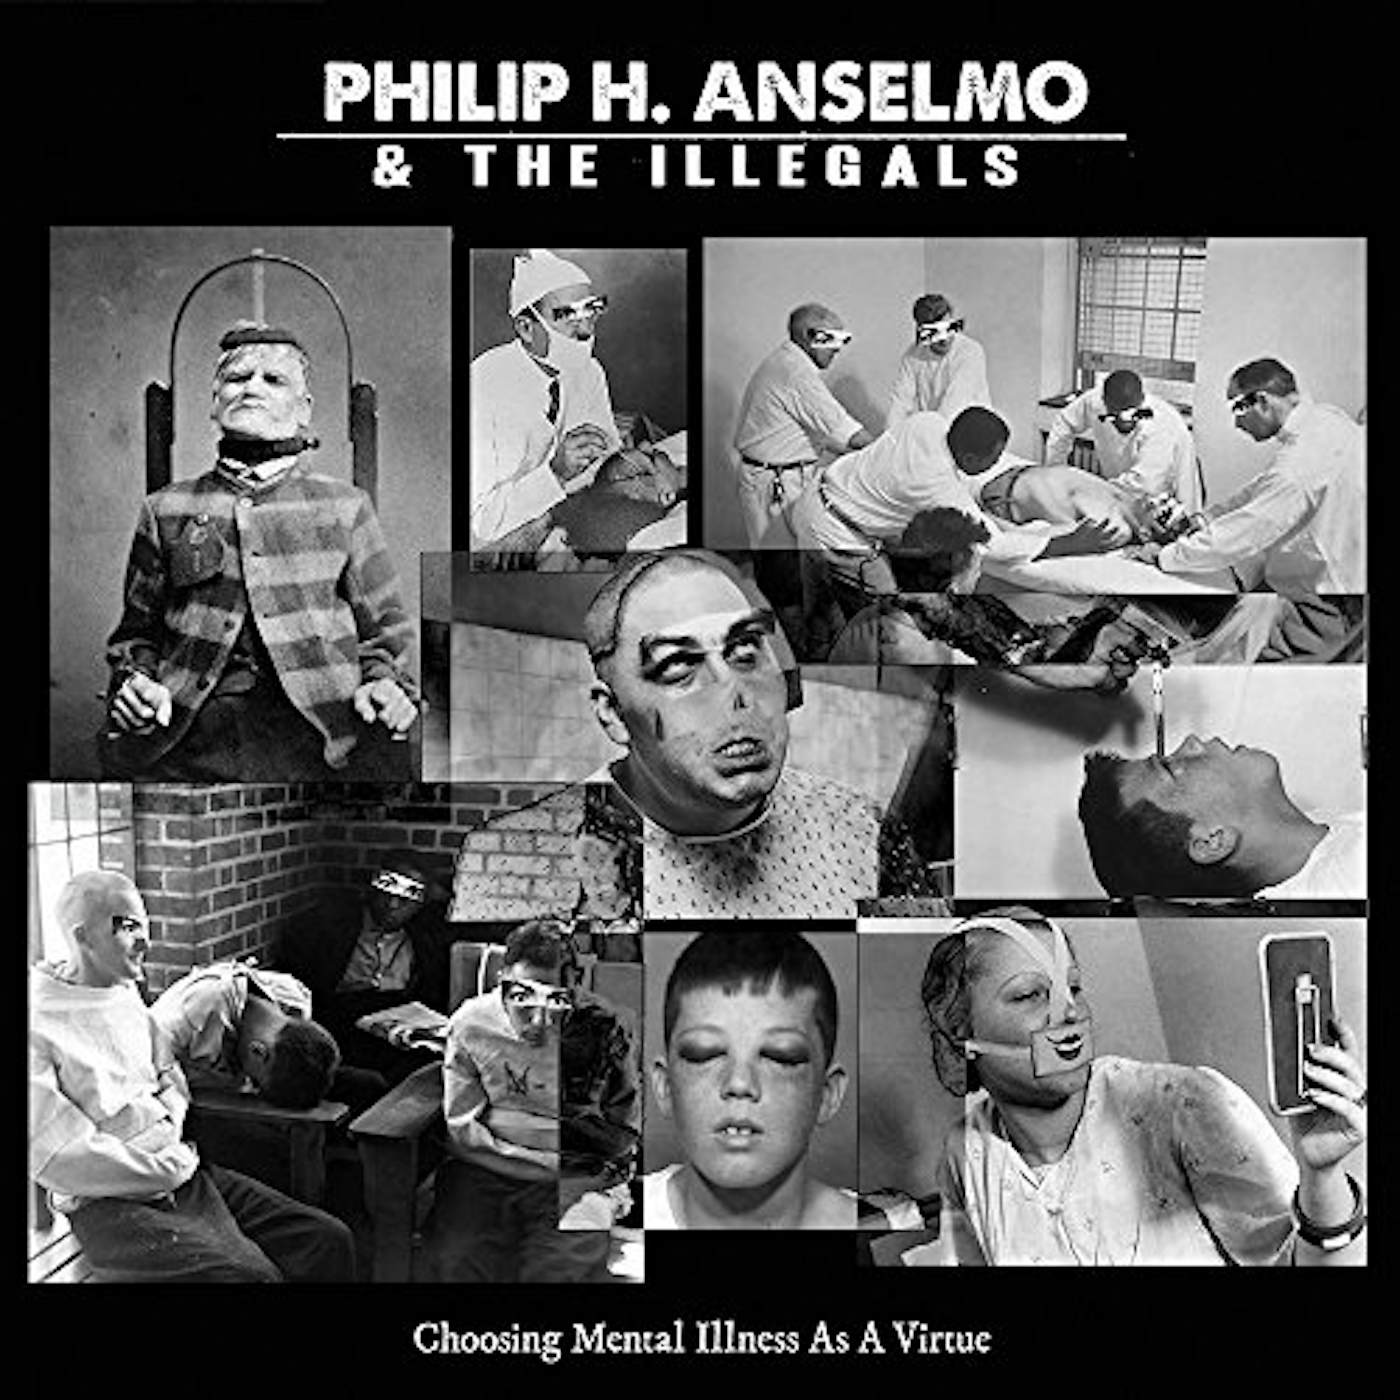 Philip H. Anselmo and The Illegals Choosing Mental Illness as a Virtue Vinyl Record